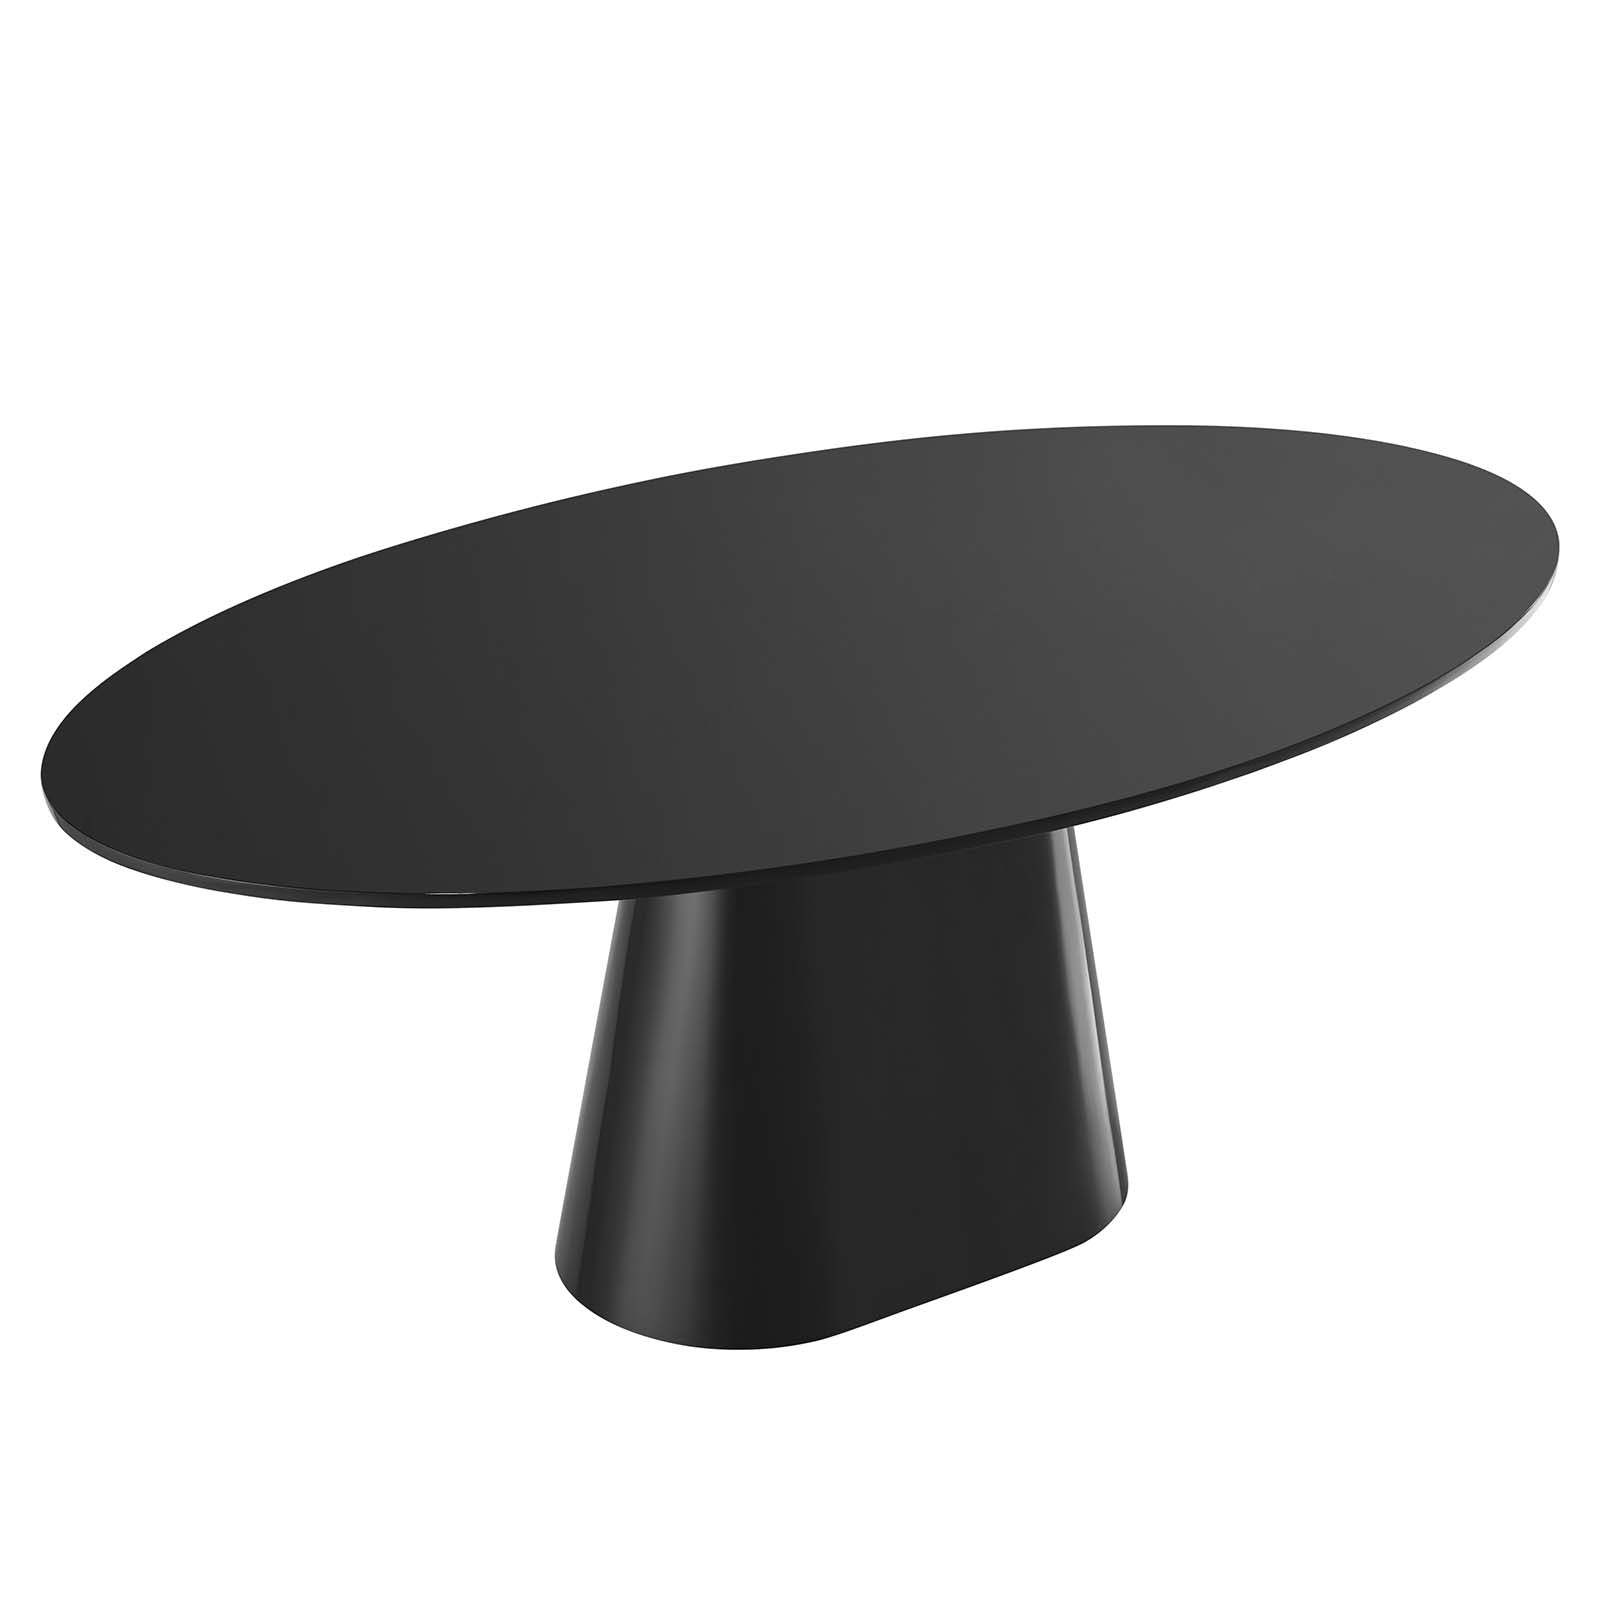 Modway Dining Tables - Provision 75" Oval Dining Table Black